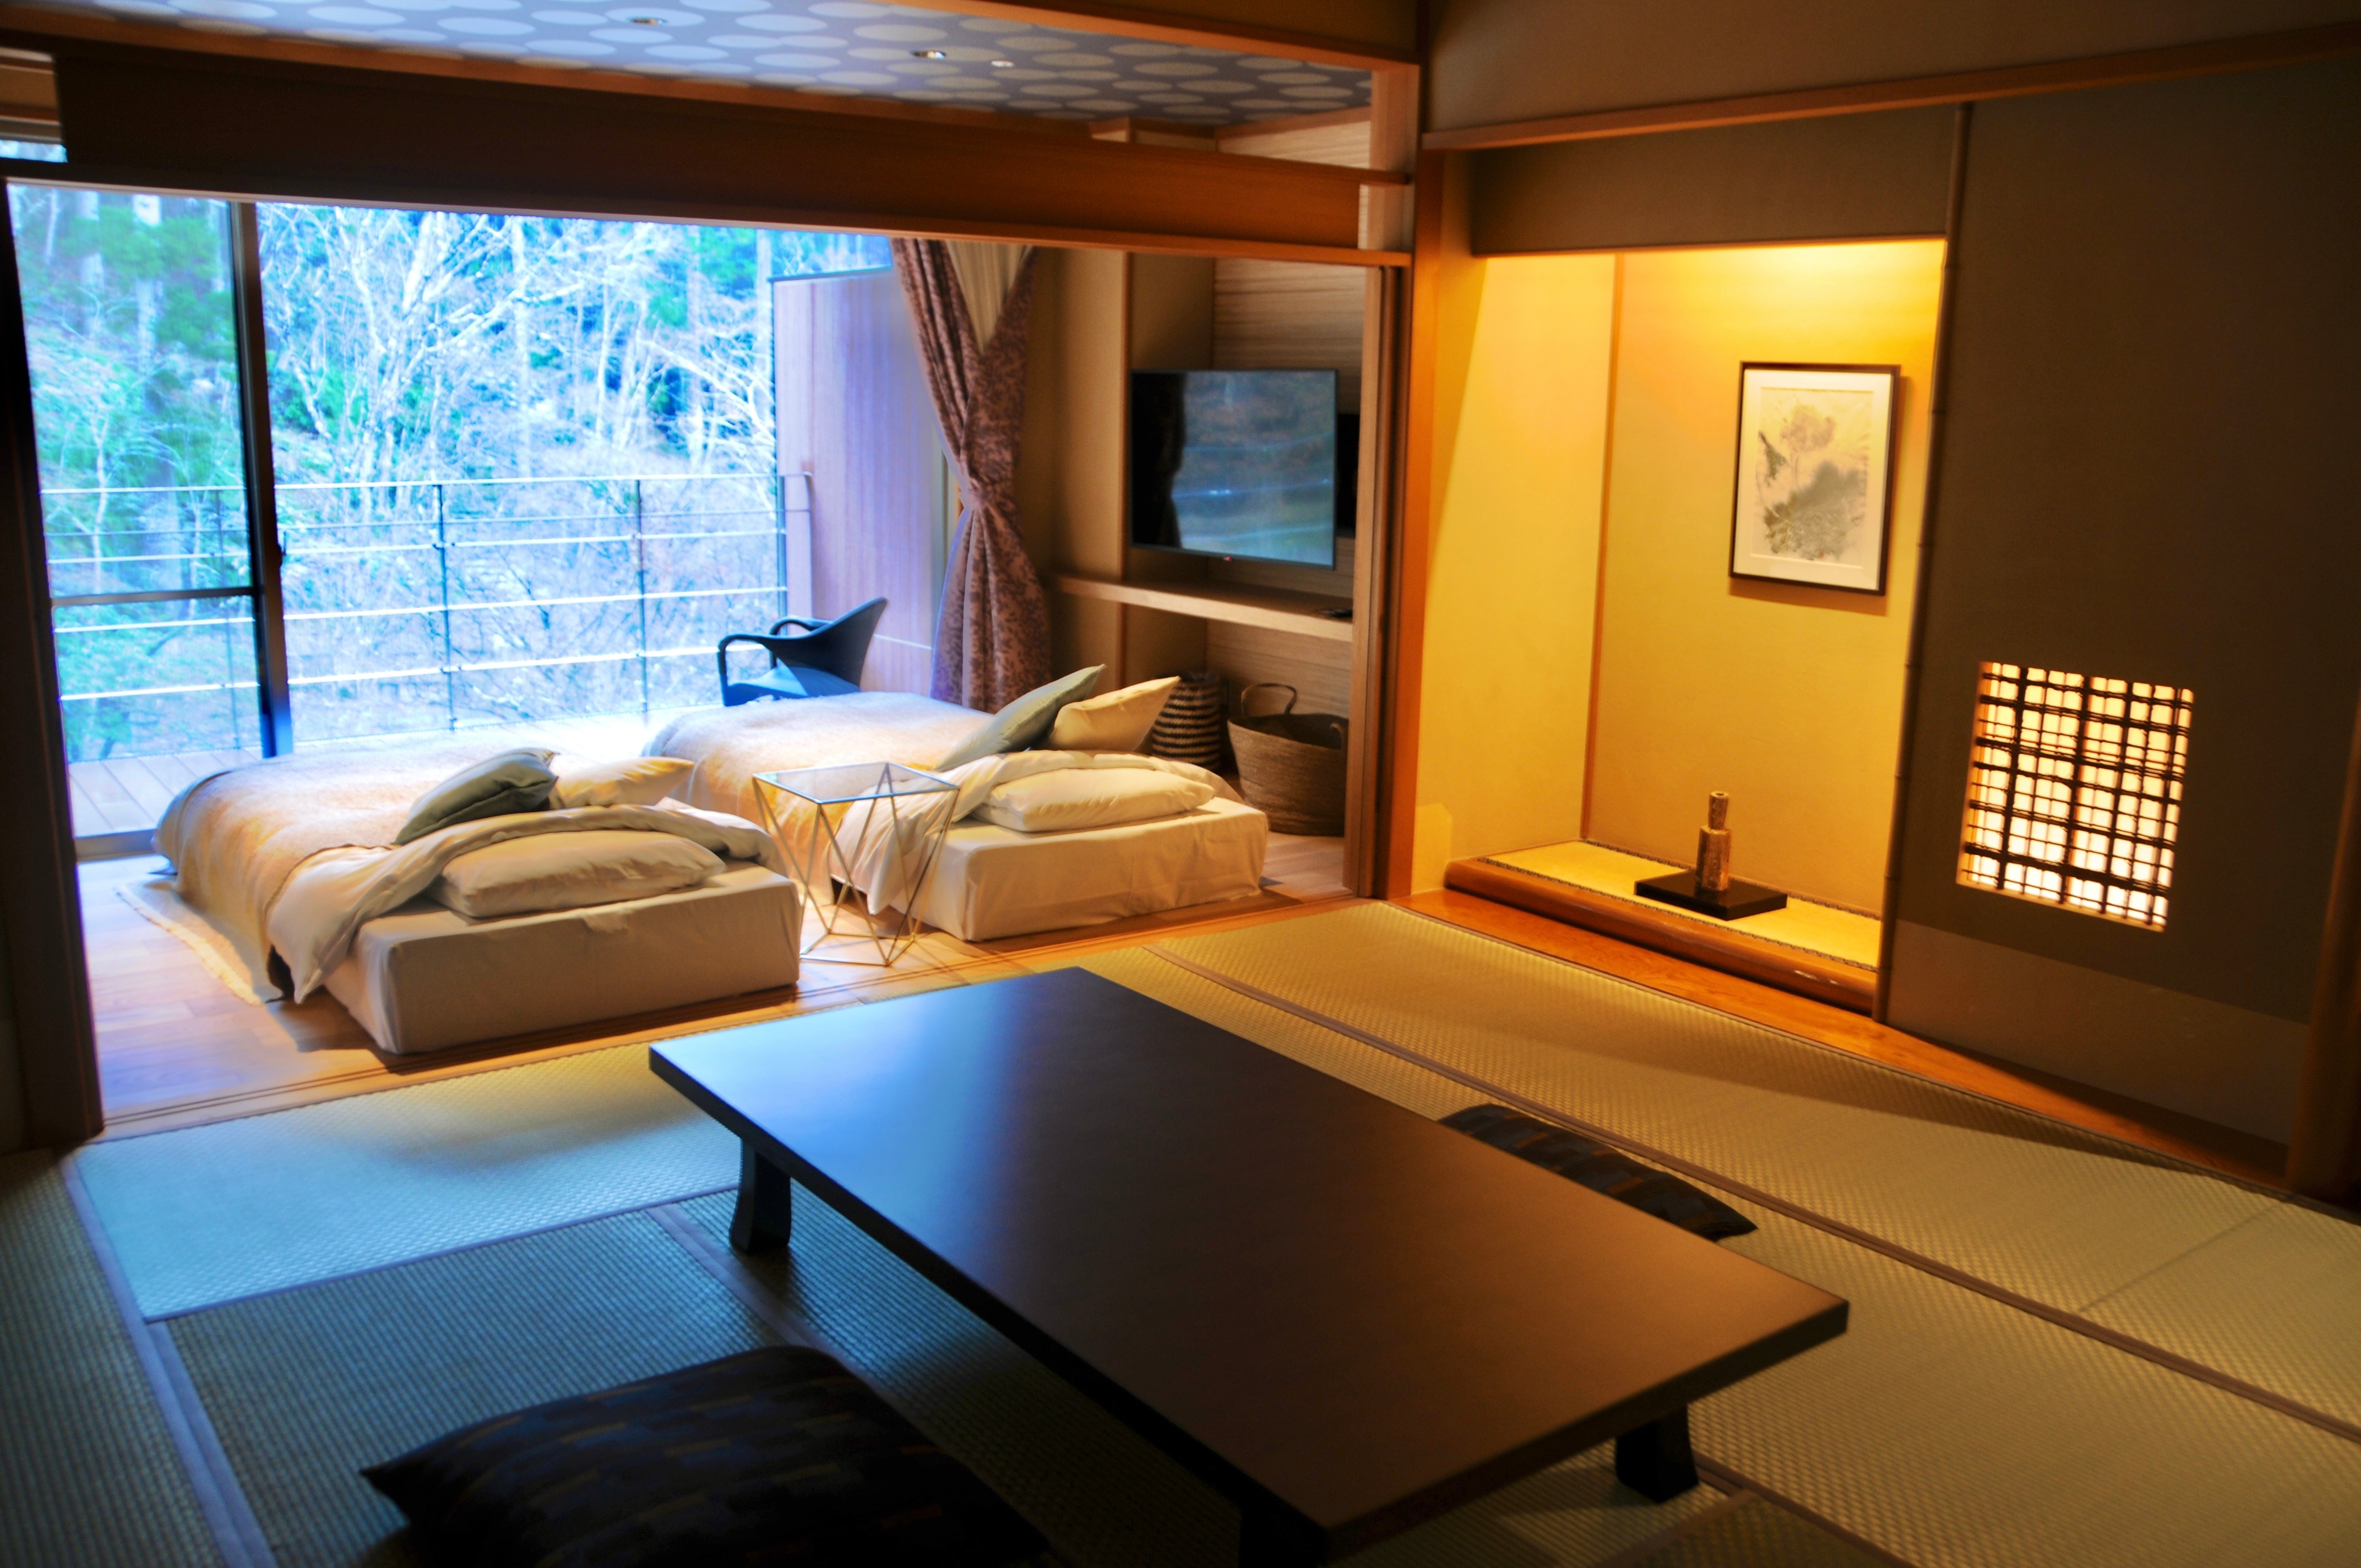 2022.1 January ☆ Celebration ☆ Upgraded room completed ♪ Semi-open-air bath hot spring & terrace + guest room with Japanese bed (night image)